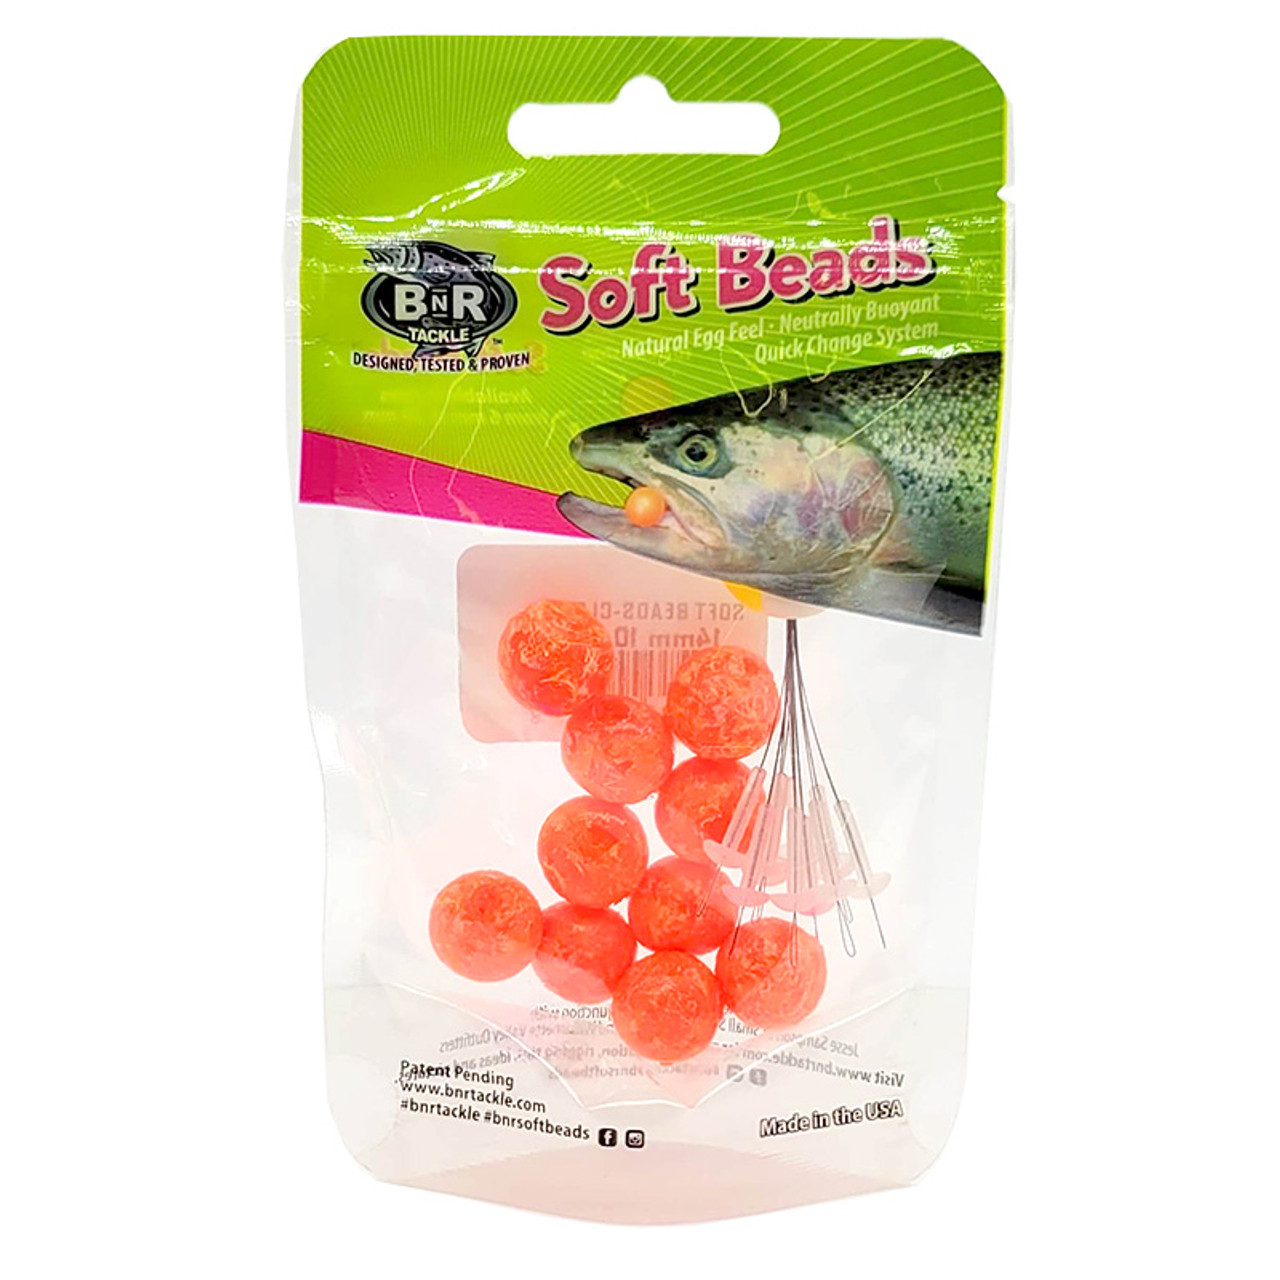 Steel Round Fishing Weights | Grab-n-Go Packs (Larger Sizes) - BnR Tackle